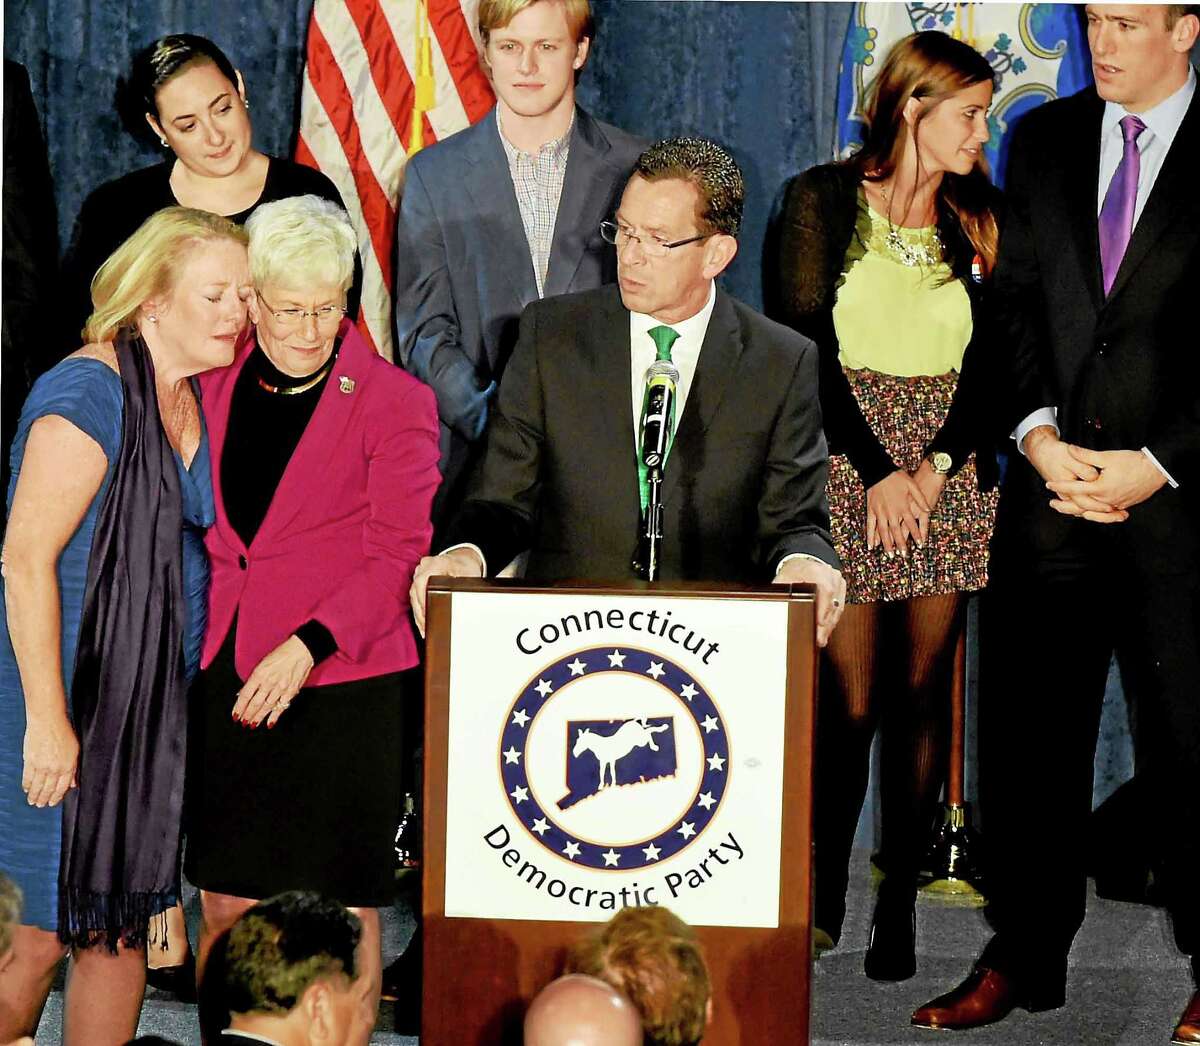 Incumbent Connecticut Gov. Malloy with Lt. Gov. Nancy Wyman, and Malloy’s wife Cathy, far left, leaning on Wyman, gives a post-midnight speech to supporters claiming victory on election night at The Society Room in Hartford, Connecticut during a close race against Republican challenger Tom Foley Tuesday, November 4, 2014.